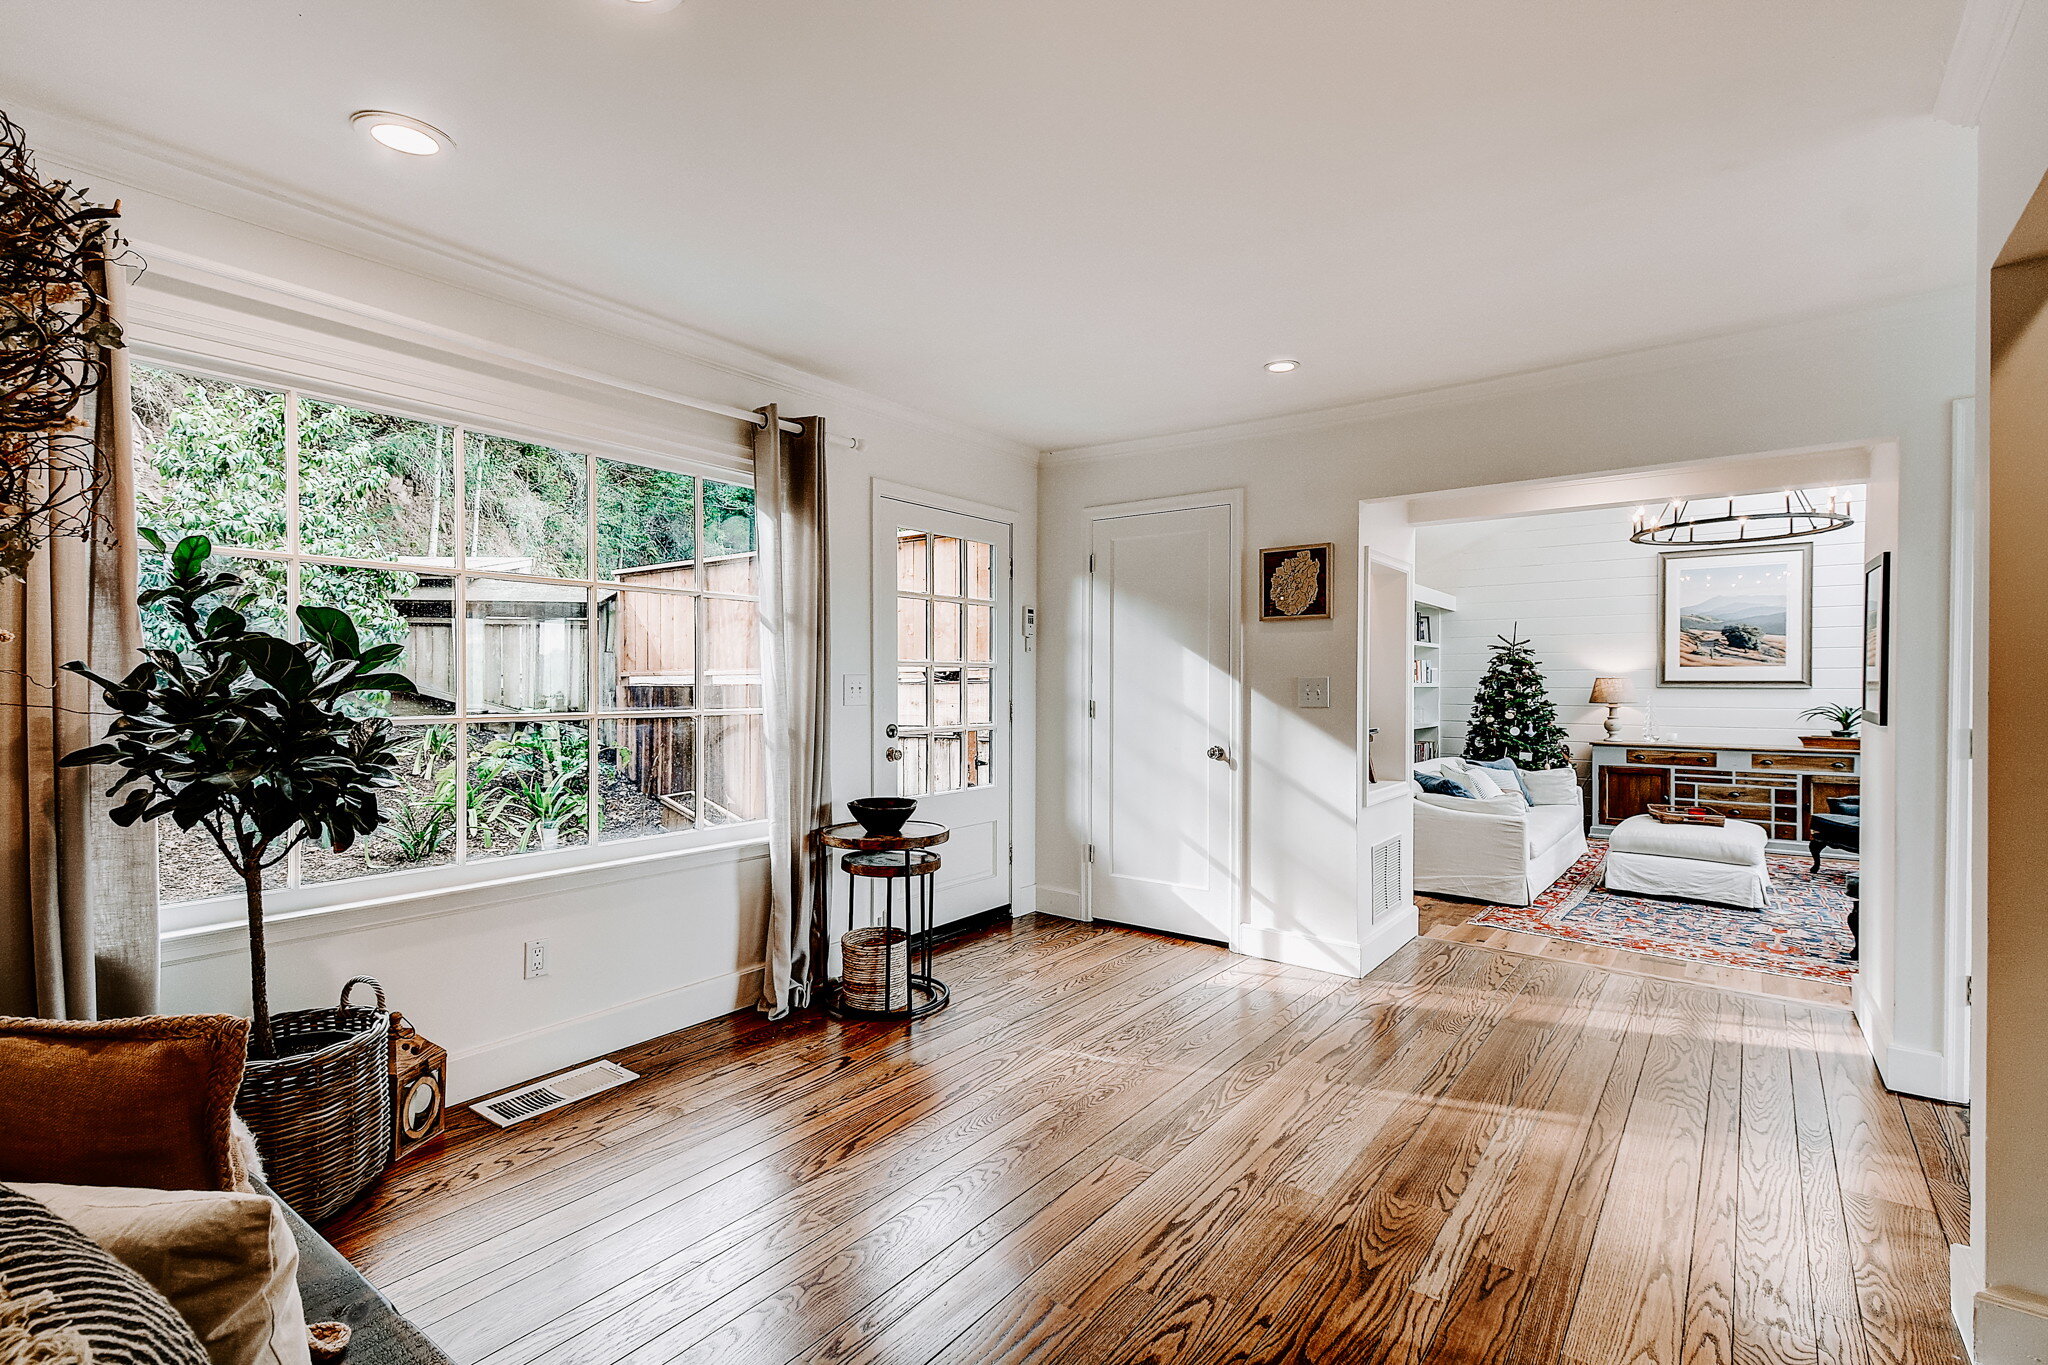 500 Edgewood Avenue-15- Mill Valley Real Estate - Listed by Allie Fornesi Top Mill Valley Realtor.jpg